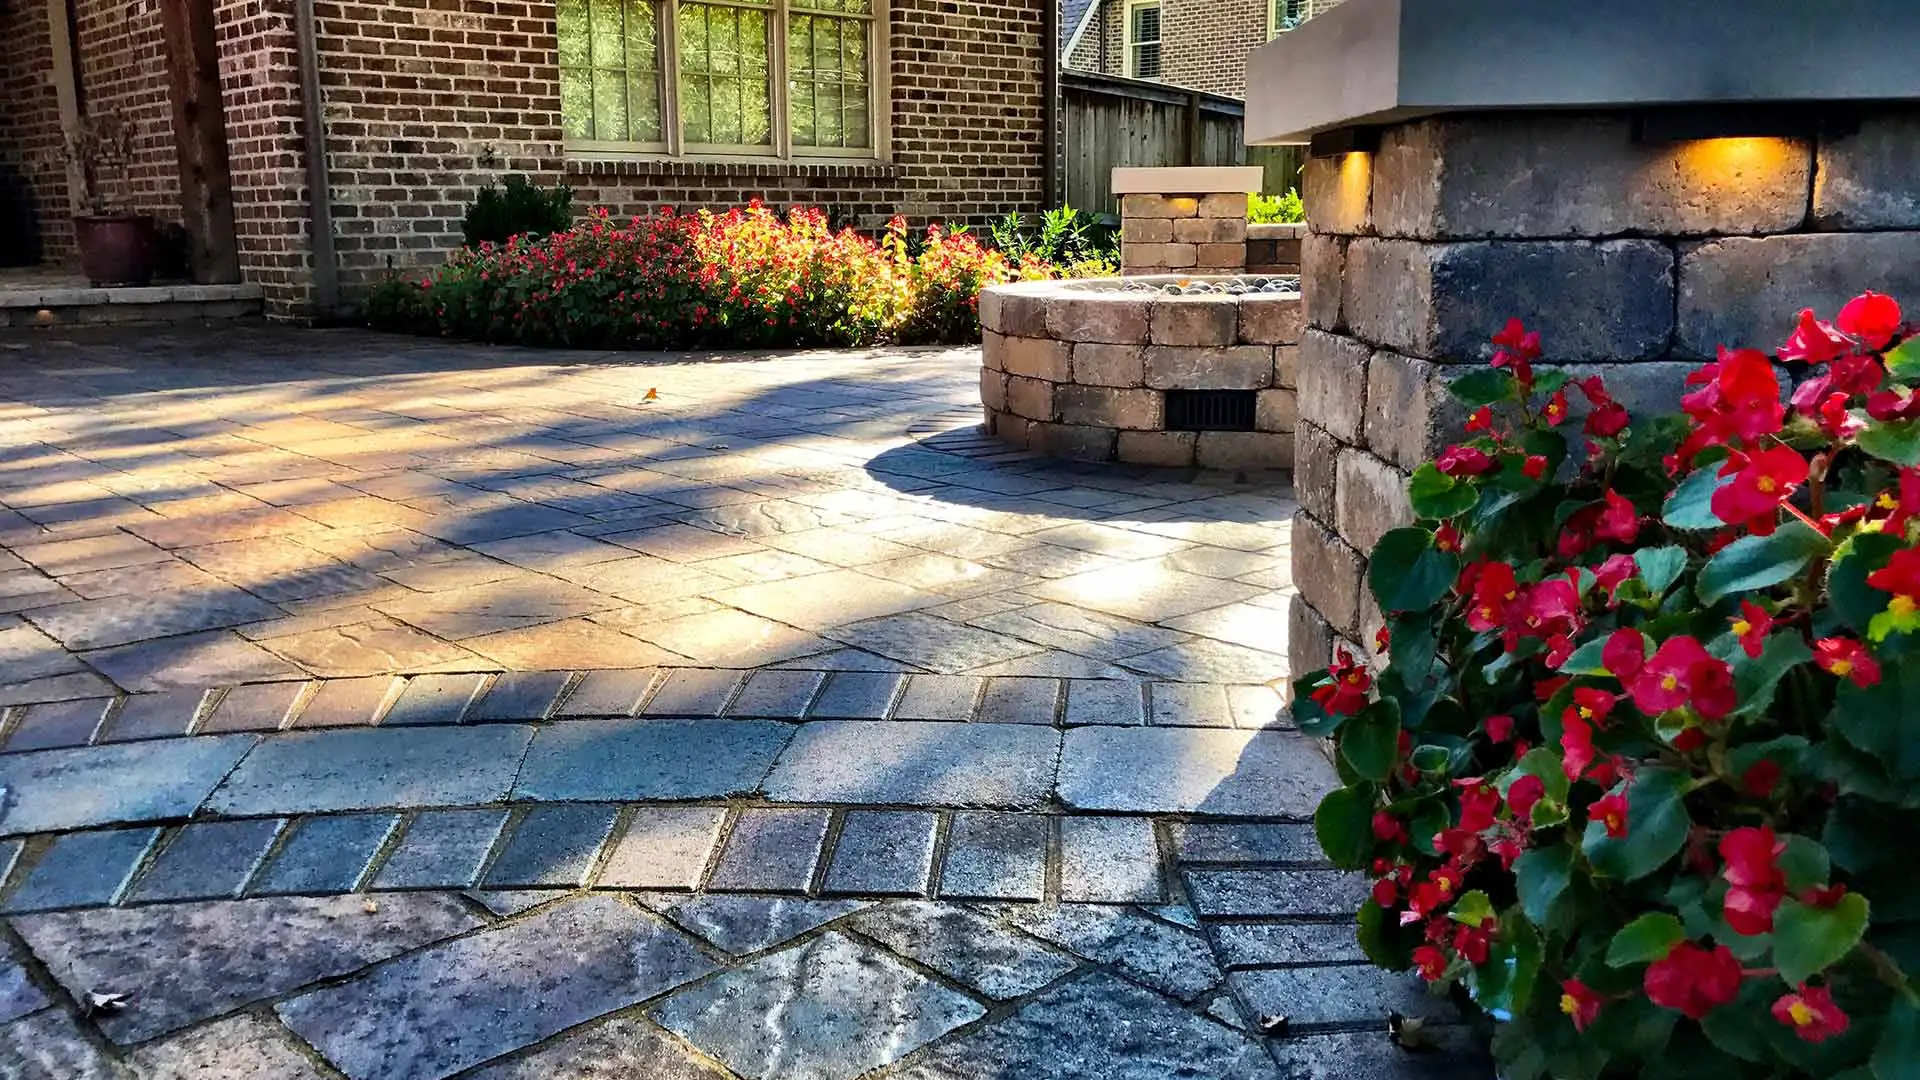 Paver patio and lighting installed at a home in Germantown, TN.